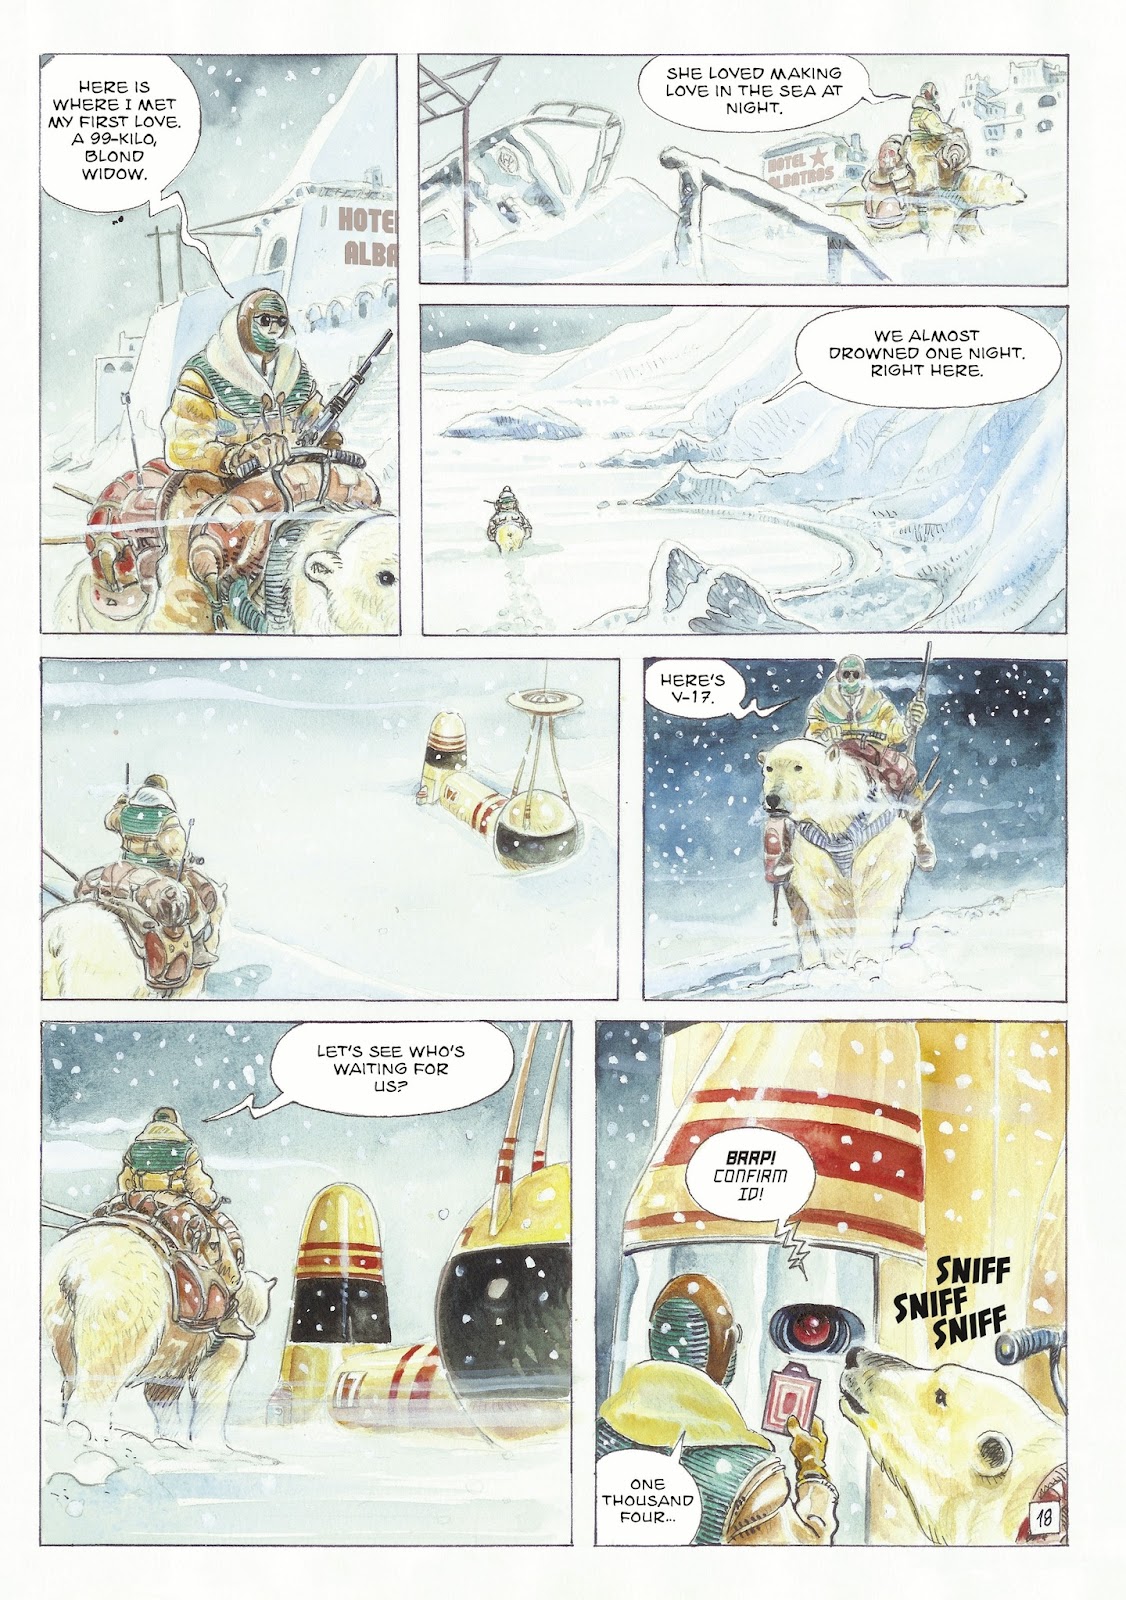 The Man With the Bear issue 1 - Page 20